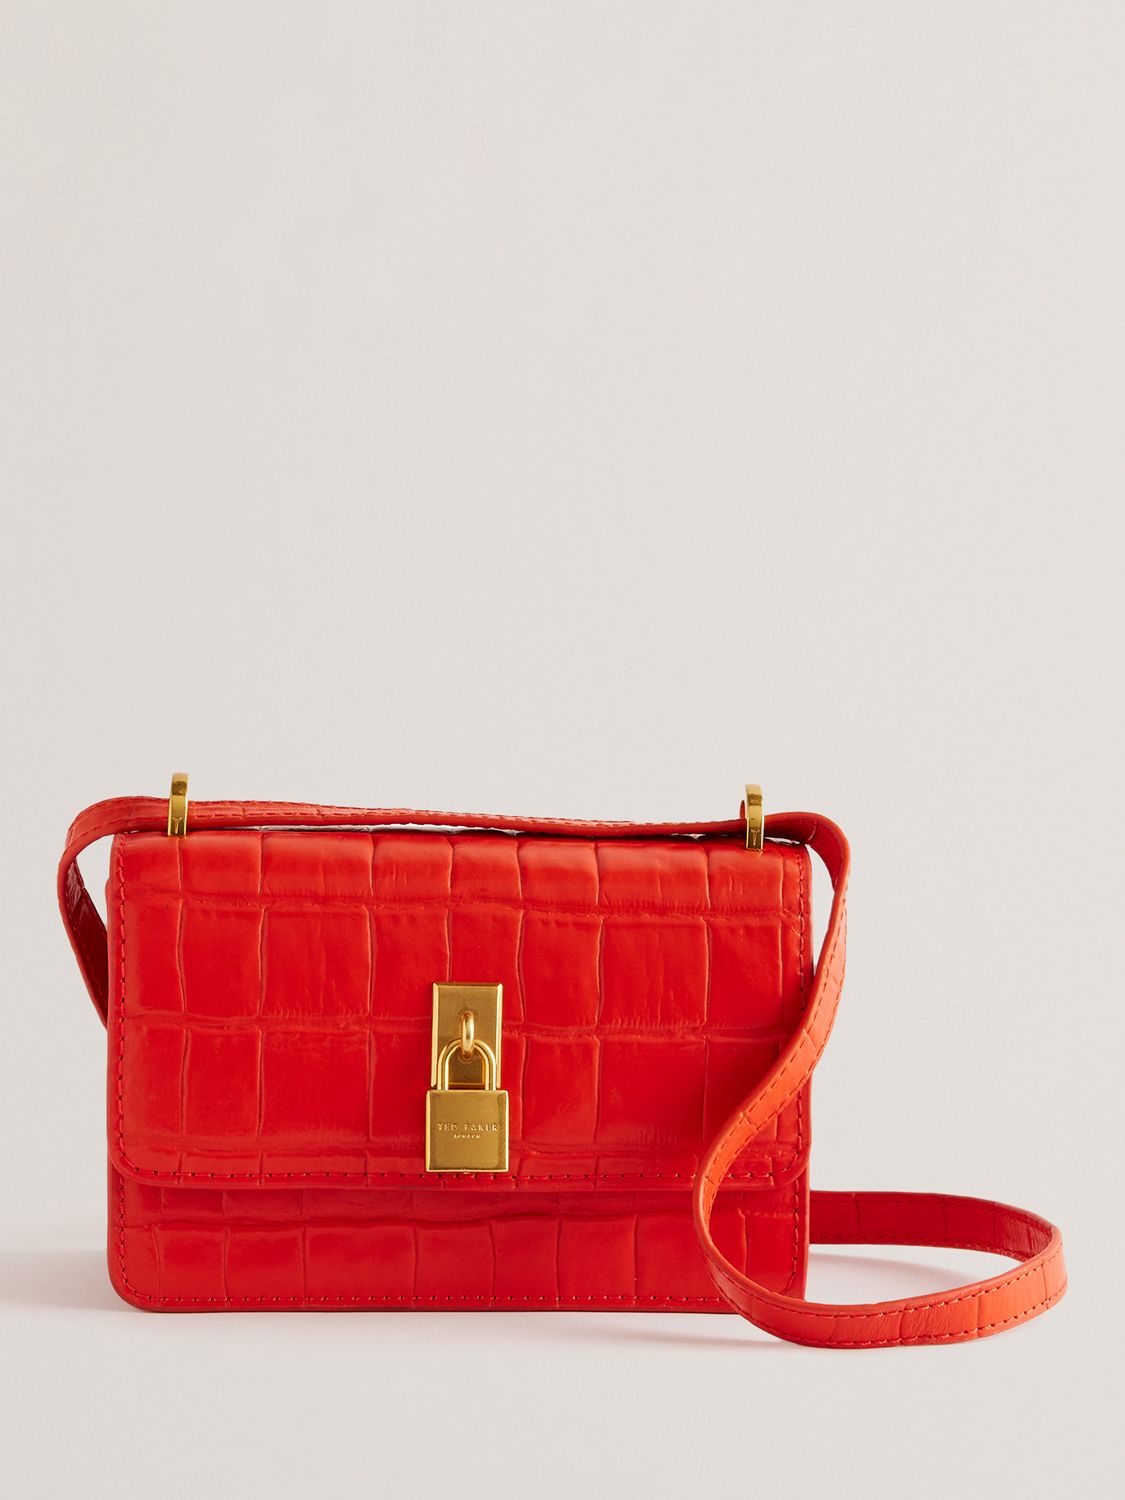 Ted Baker Ssloane Croc Effect Leather Cross Bosy Bag, Bright Red, One Size